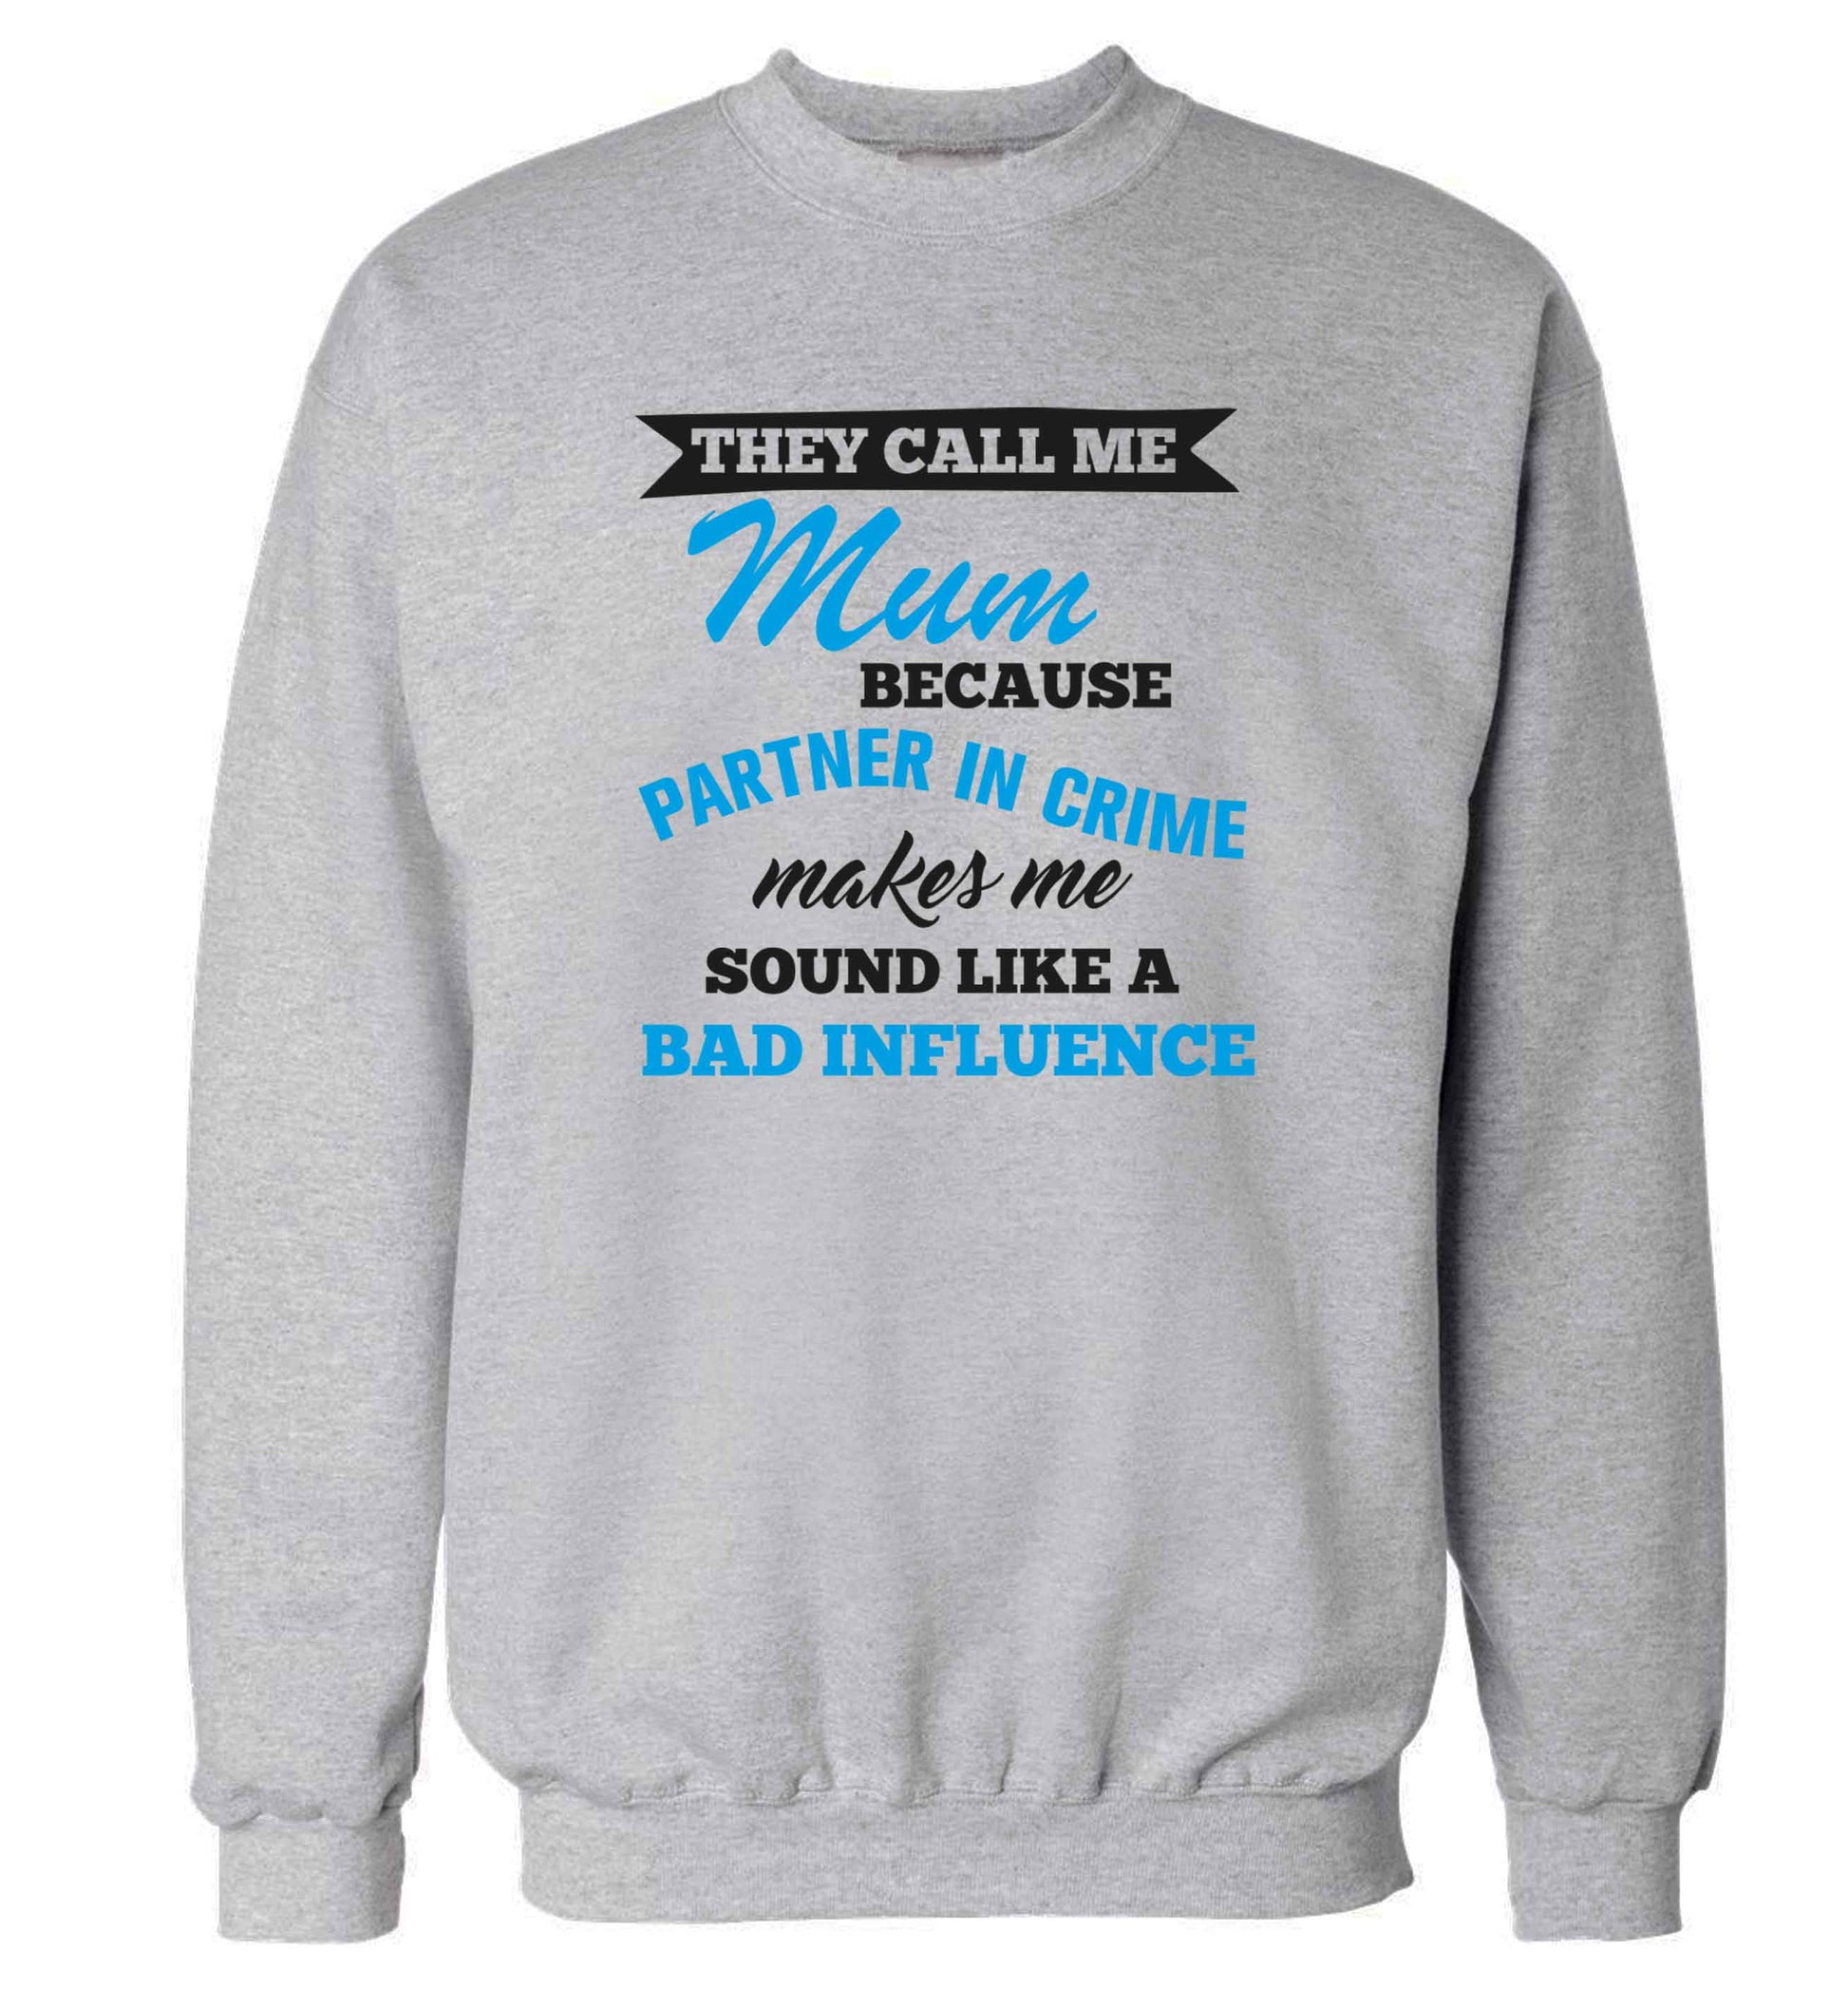 They call me mum because partner in crime makes me sound like a bad influence adult's unisex grey sweater 2XL